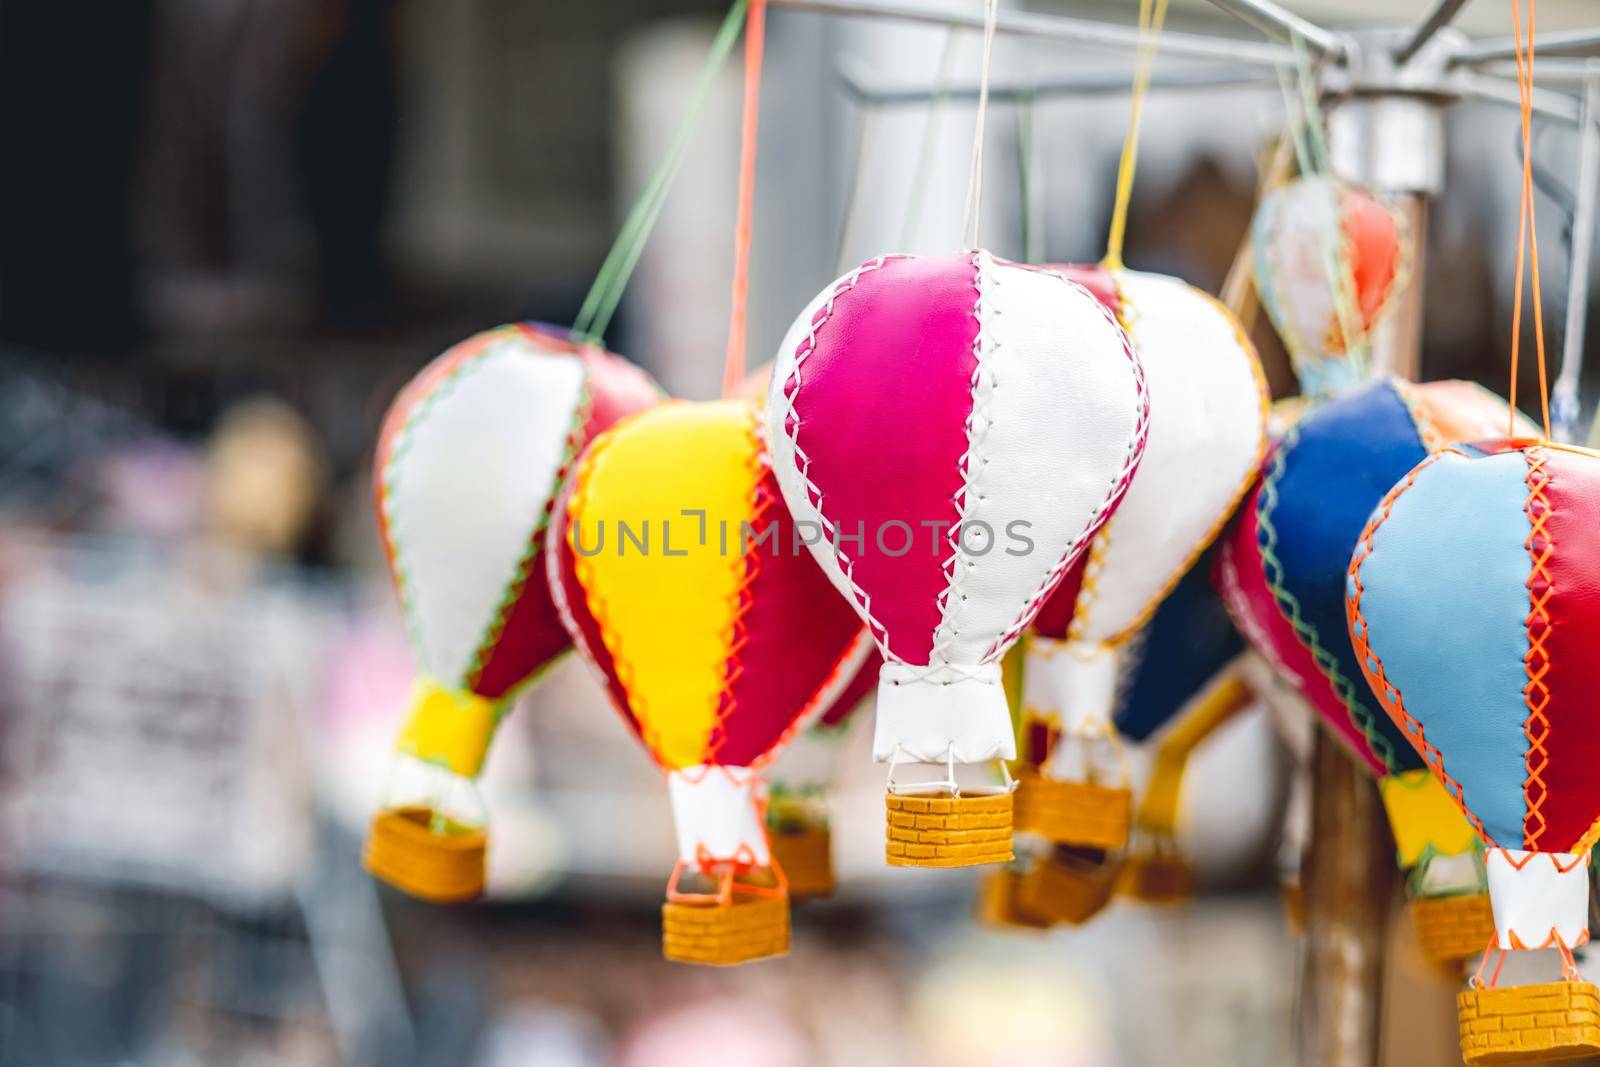 Handmade souvenirs in form of balloons by GekaSkr